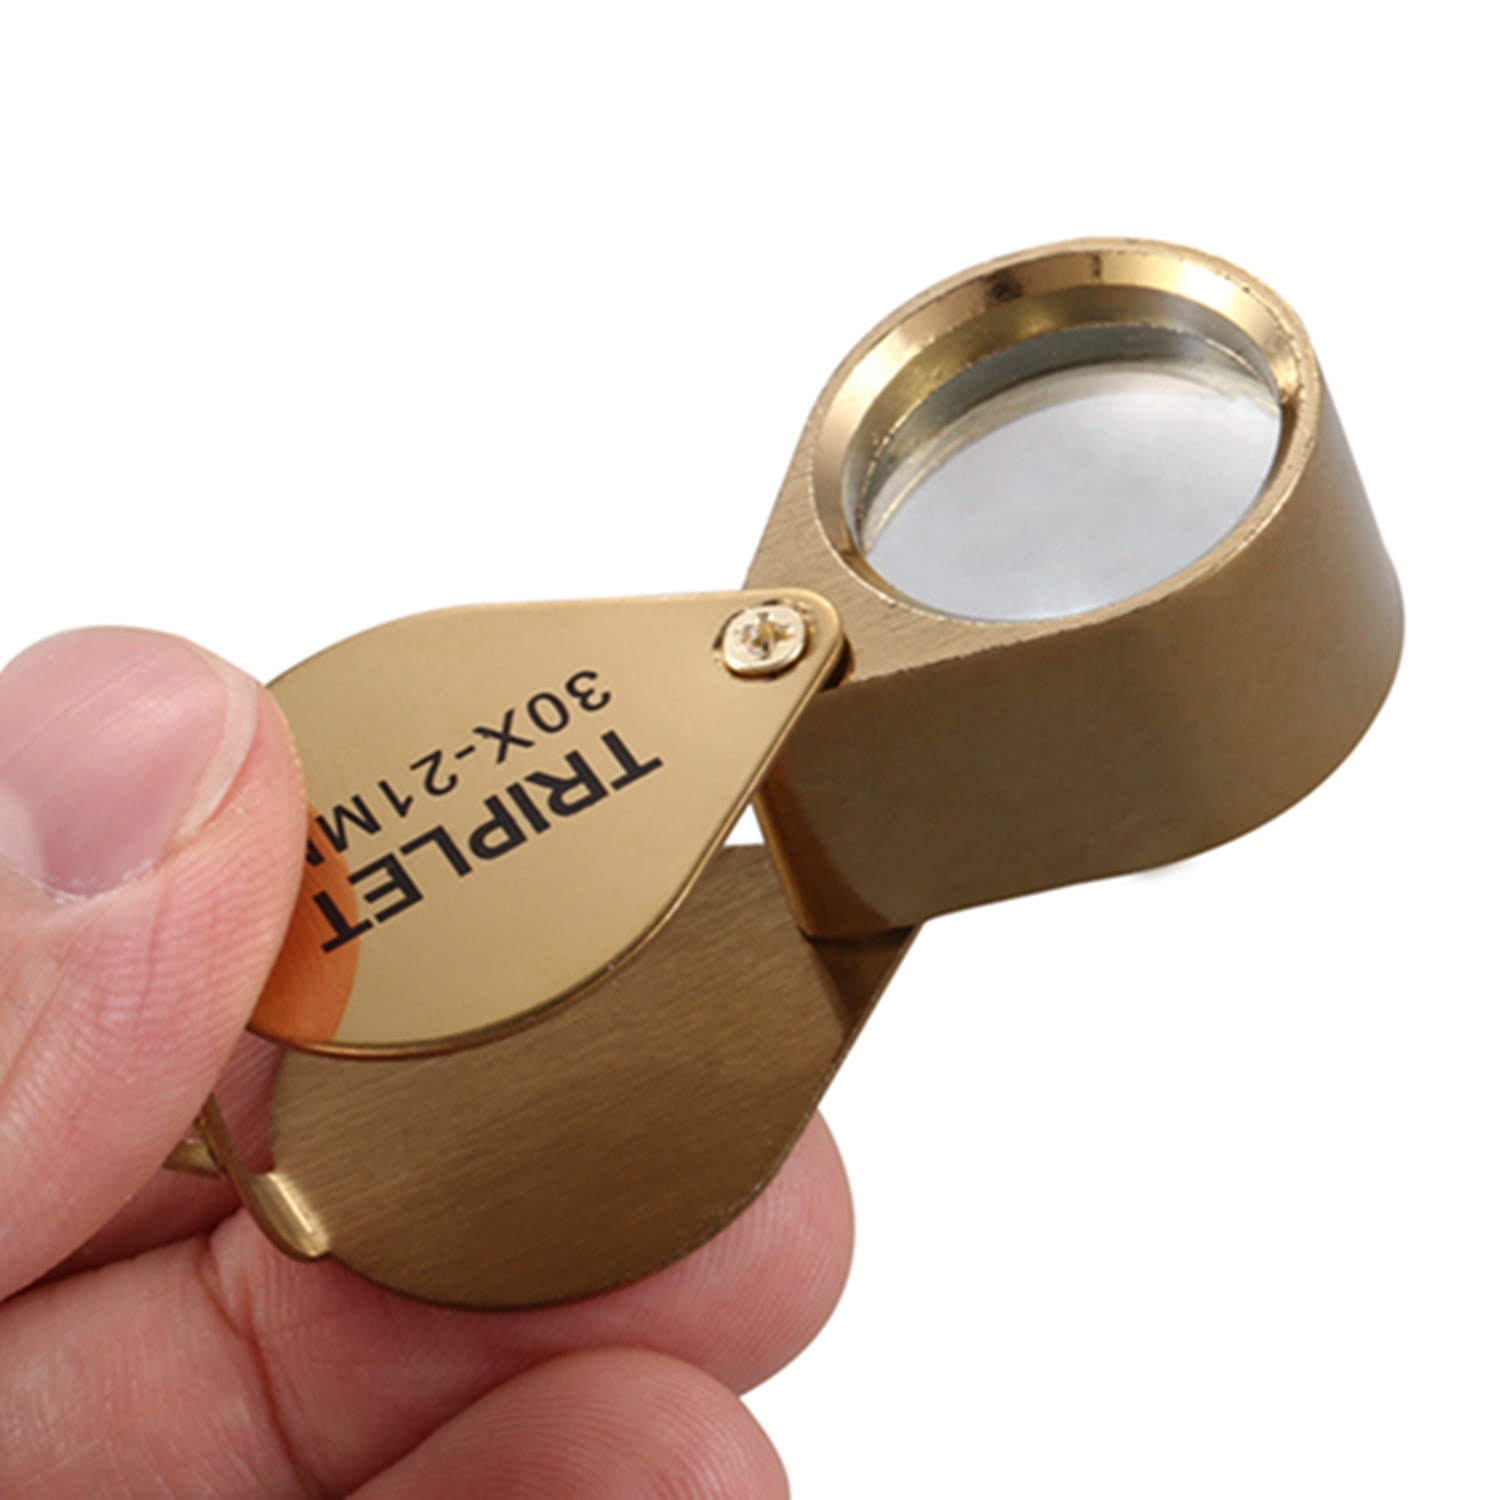 Portable Folding and M 30X Illuminated Jeweler Eye Loupe Jewelry Loupe  Loop, Ideal for Laboratory Inspection